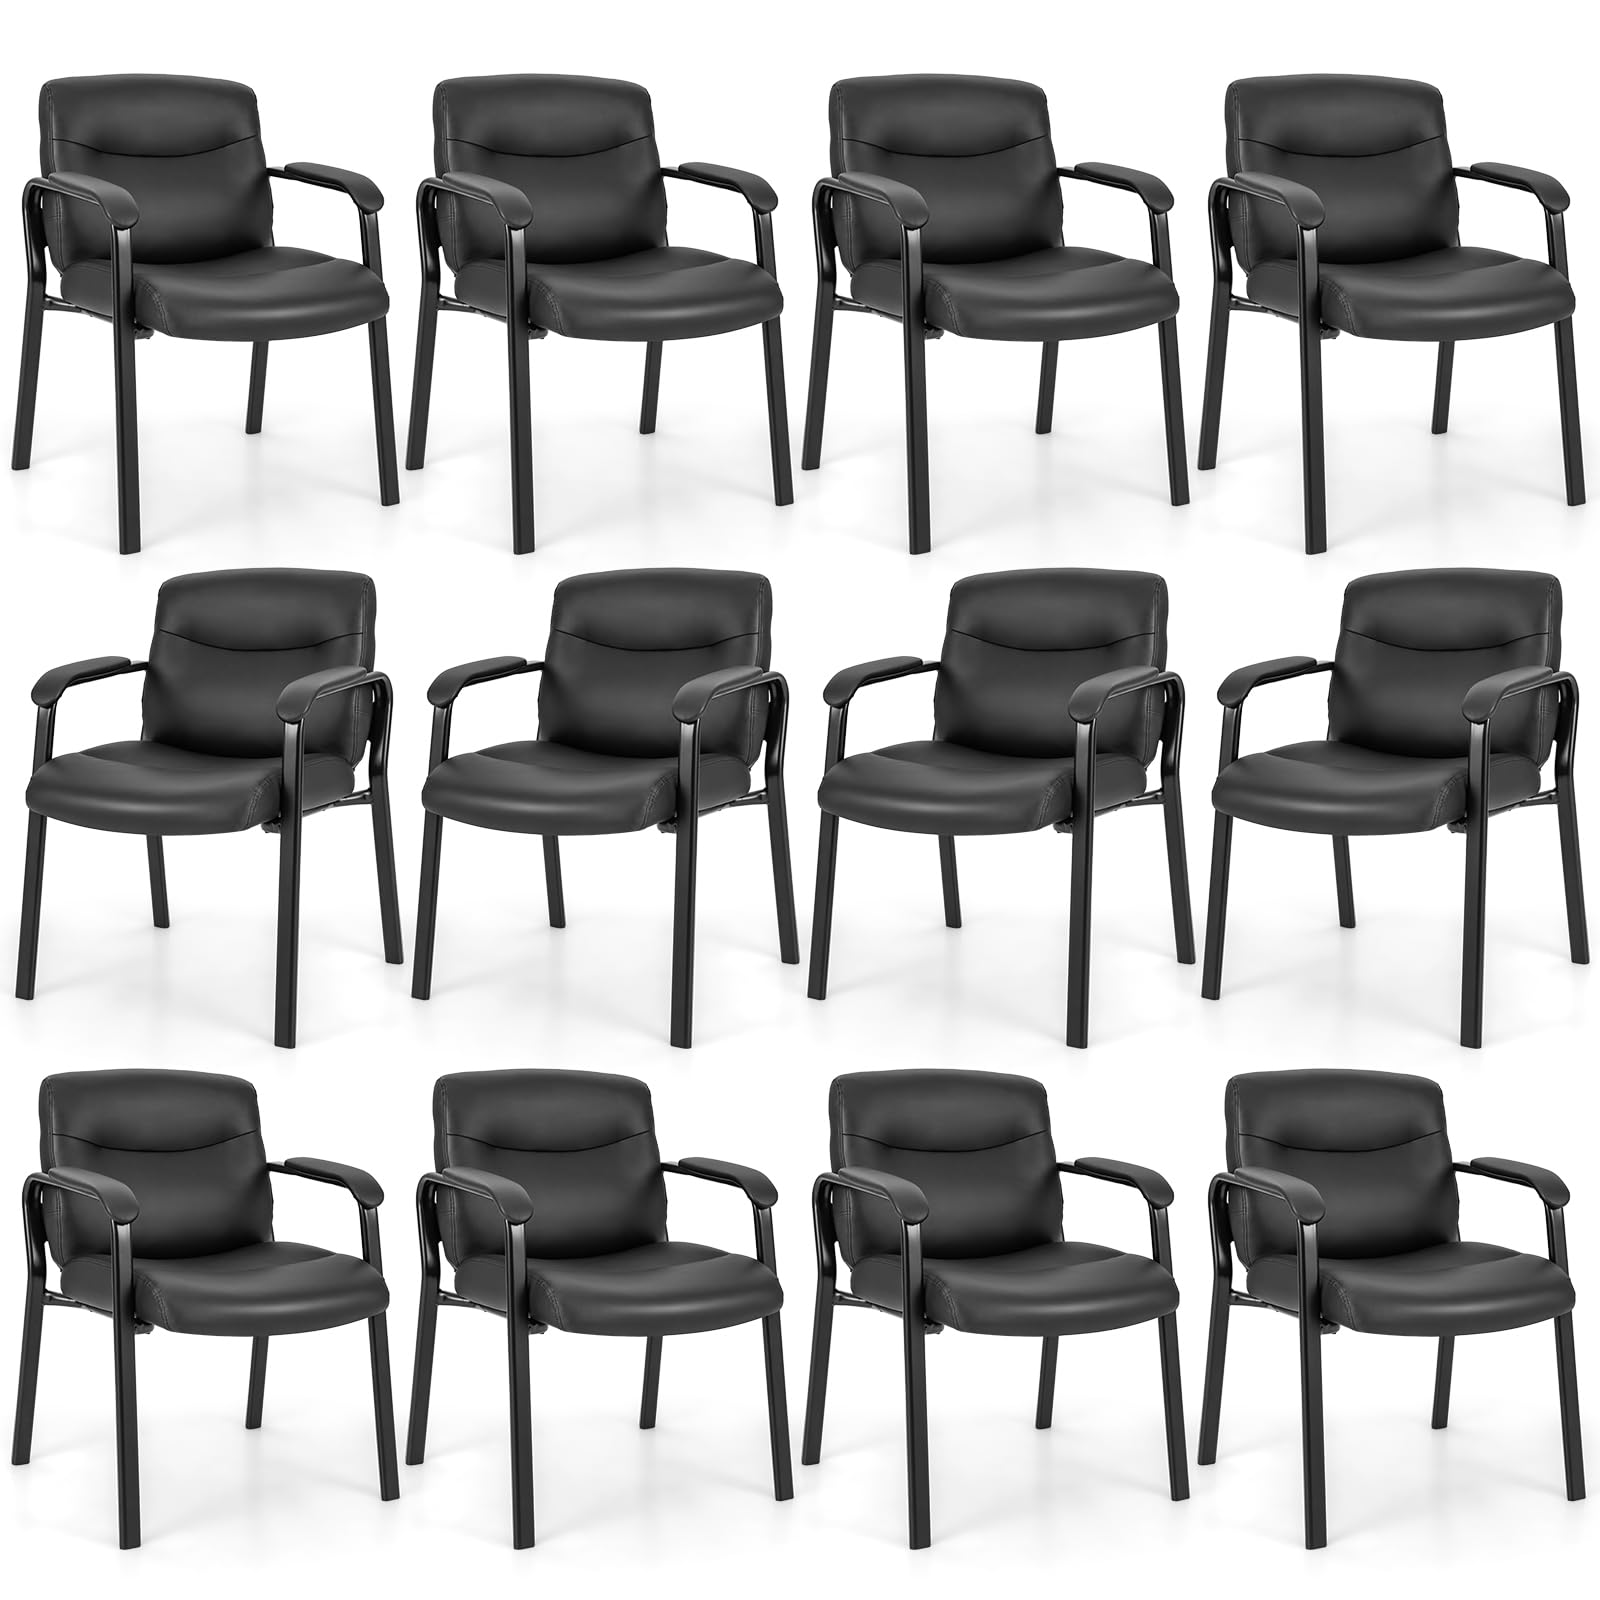 Giantex Waiting Room Chairs Set - Office Reception Chair Set